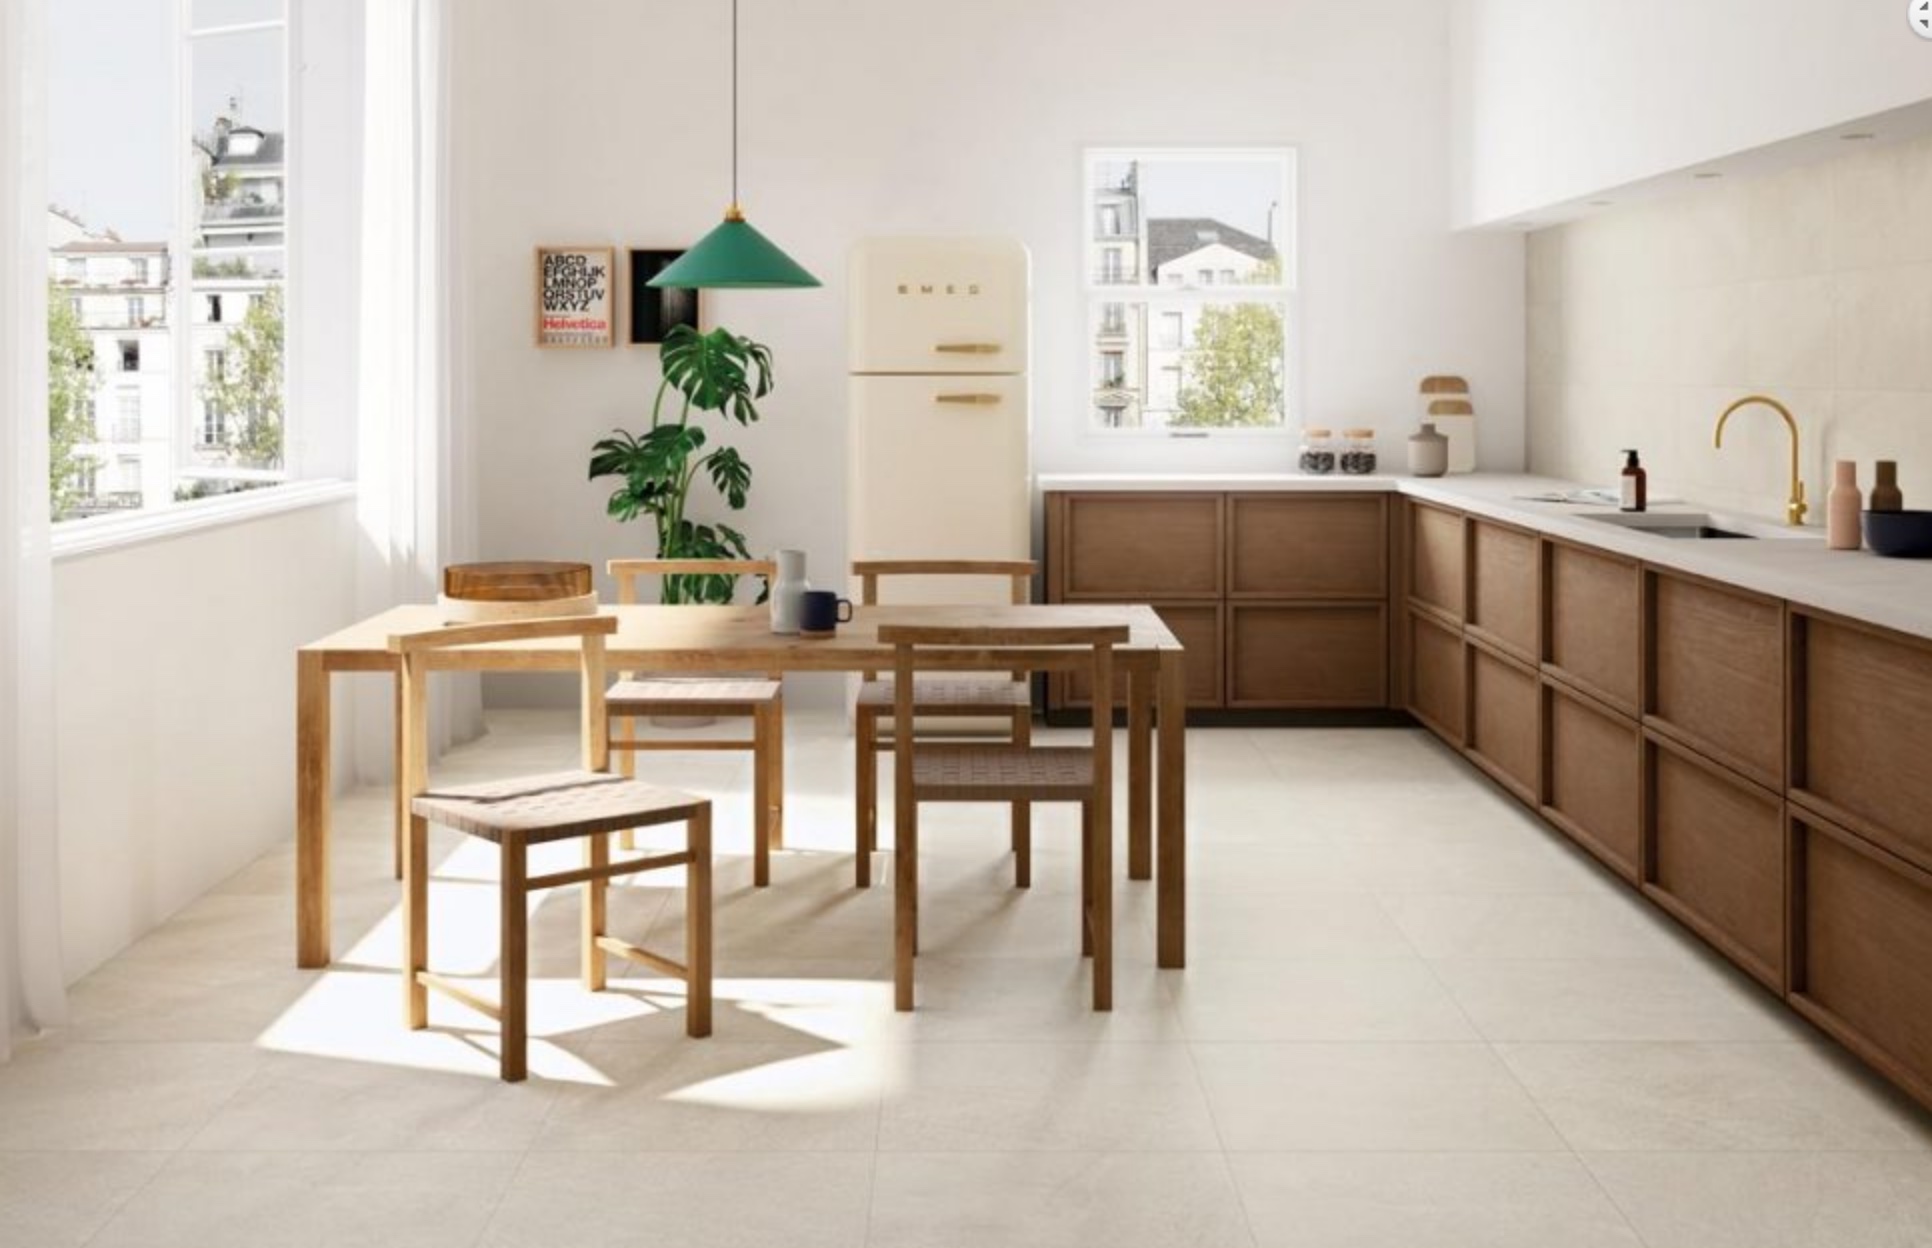 Blustyle's Yosemite Collection of porcelain tiles in kitchen